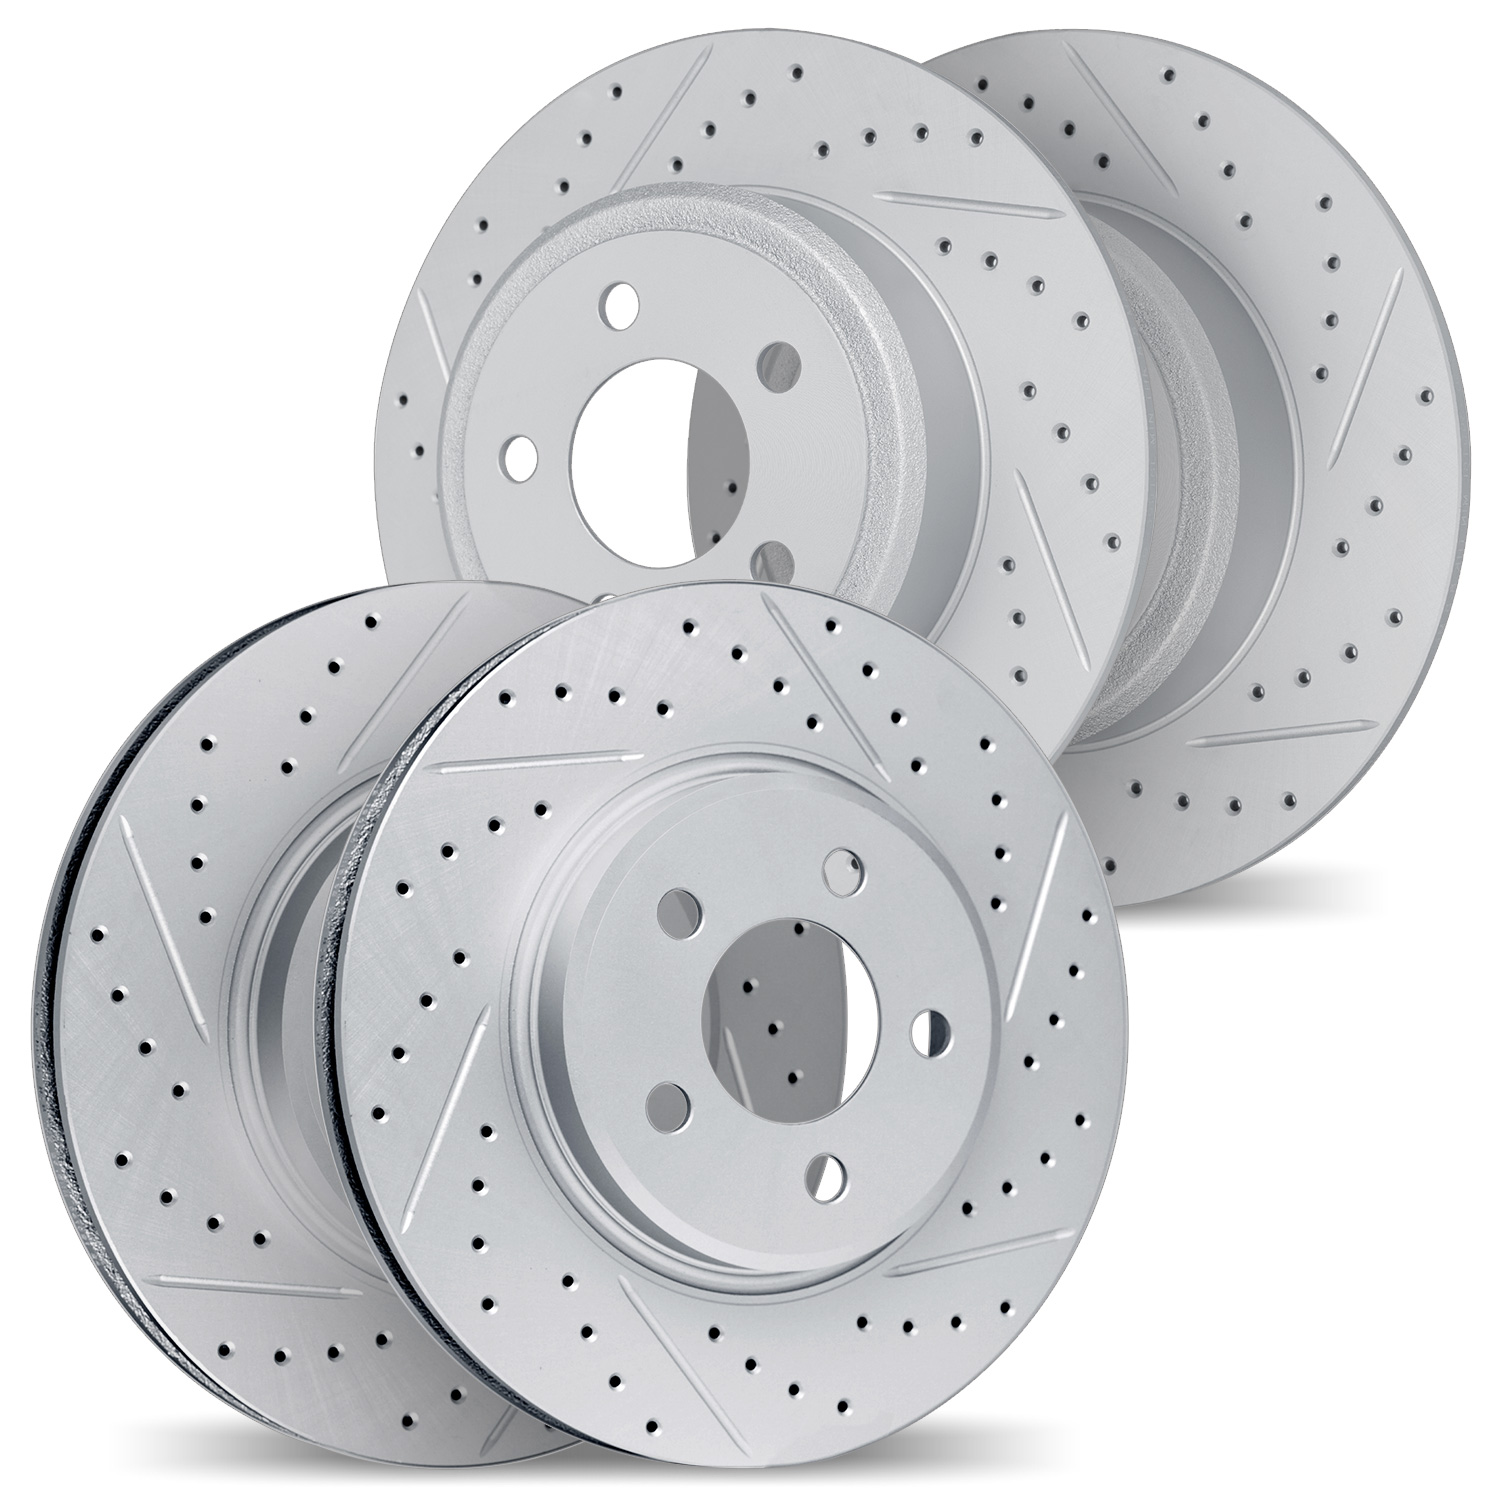 2004-76016 Geoperformance Drilled/Slotted Brake Rotors, 2004-2009 Lexus/Toyota/Scion, Position: Front and Rear